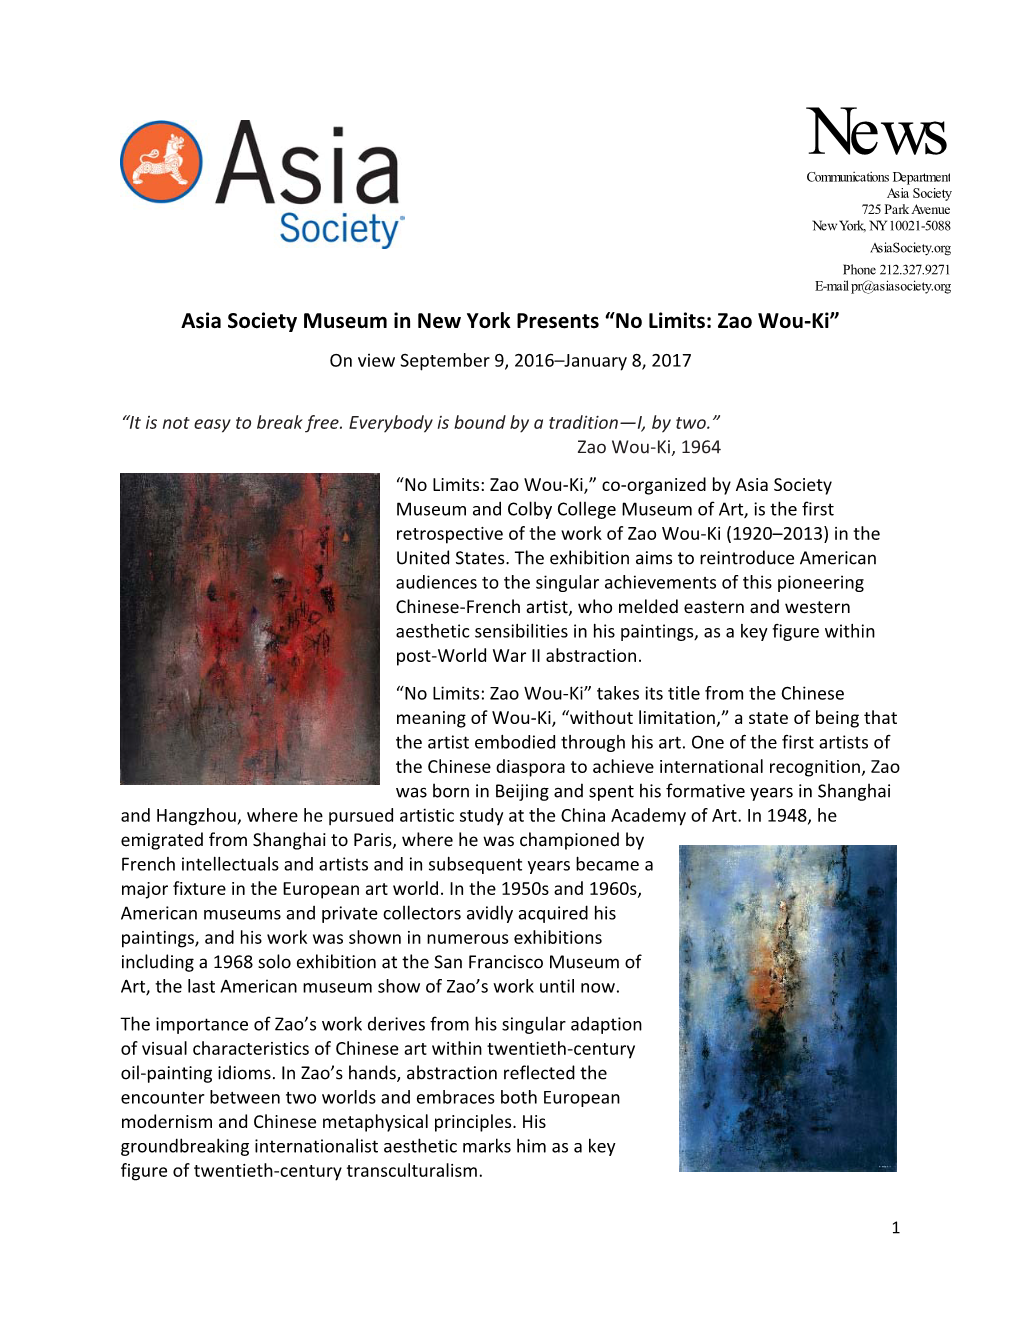 Asia Society Museum in New York Presents “No Limits: Zao Wou‐Ki” on View September 9, 2016–January 8, 2017